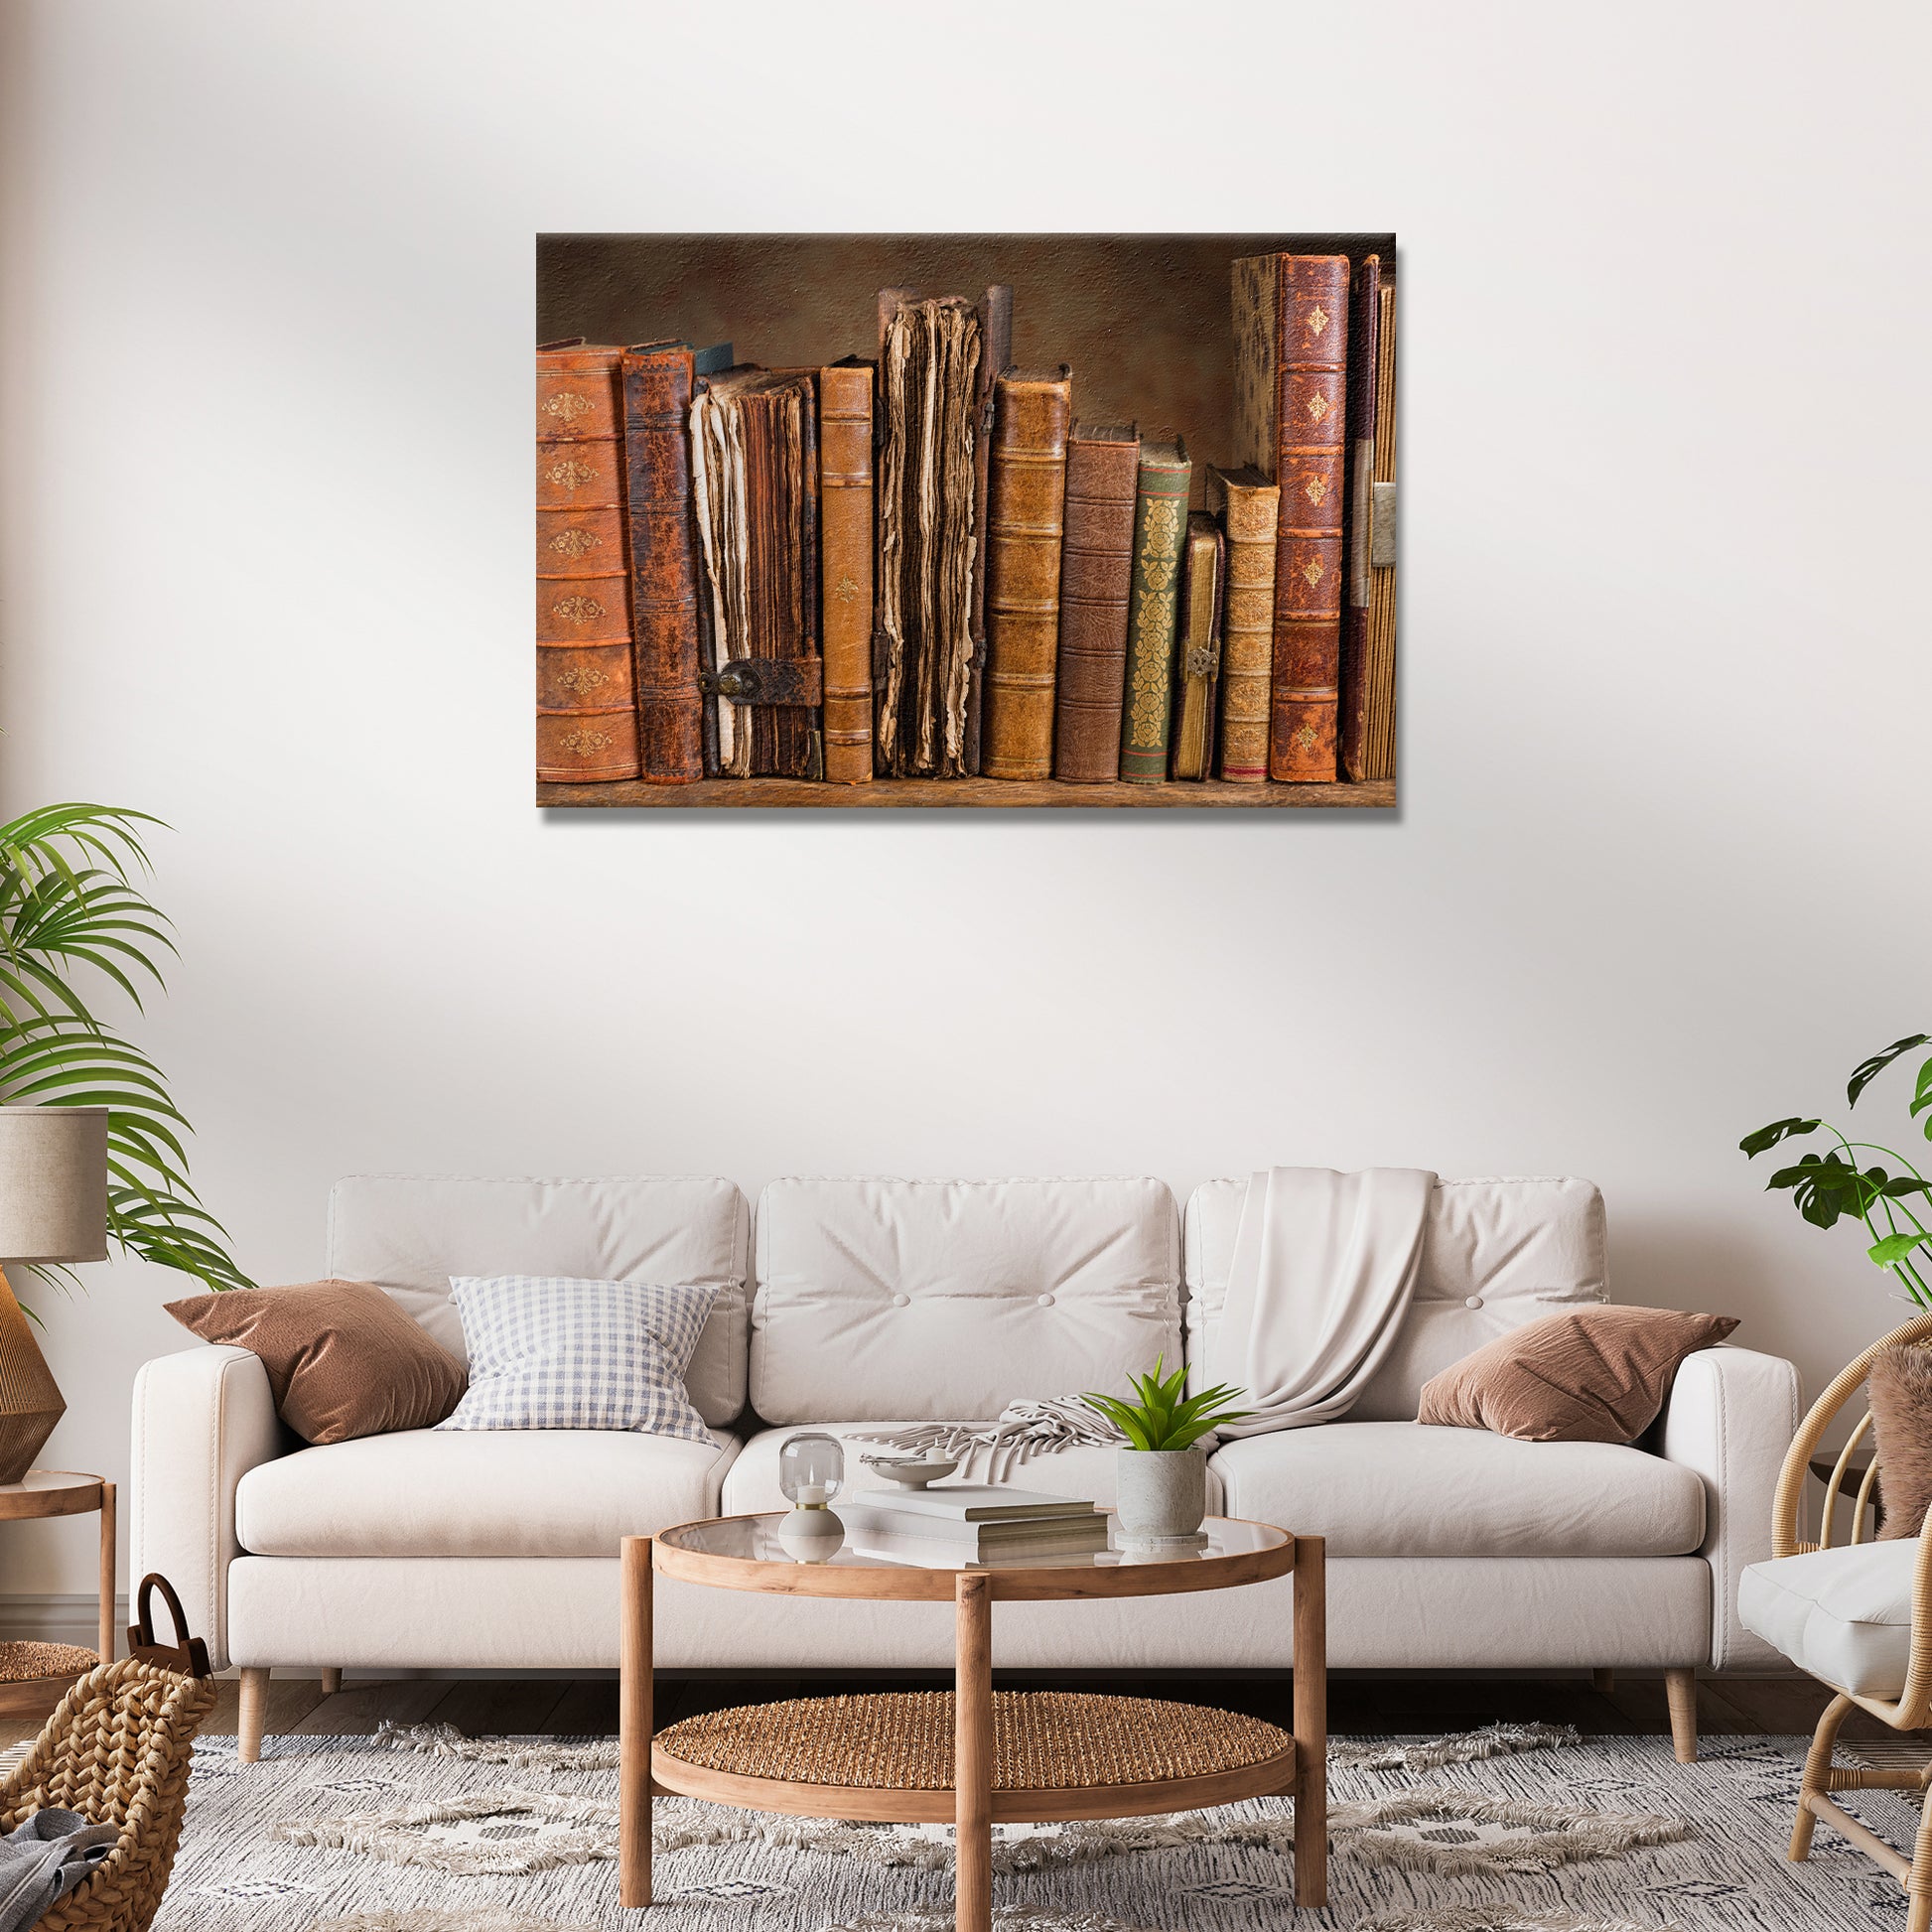 Decor Elements Books Medieval Canvas Wall Art - Image by Tailored Canvases